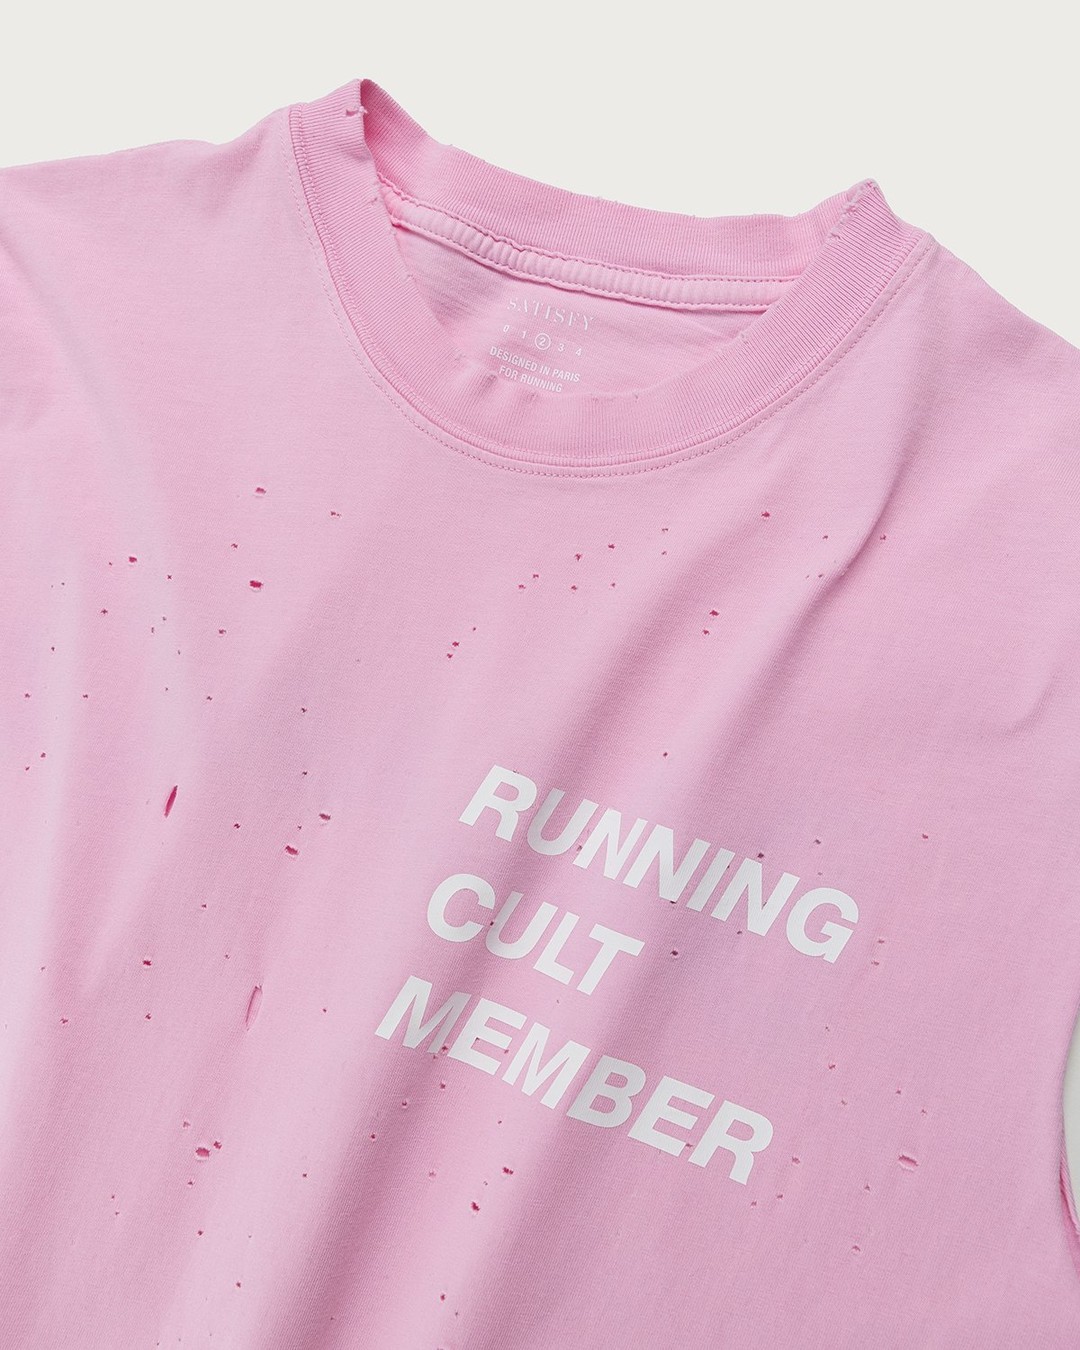 Satisfy x Highsnobiety – HS Sports Balance Muscle Tee Pink - T-shirts - Pink - Image 4